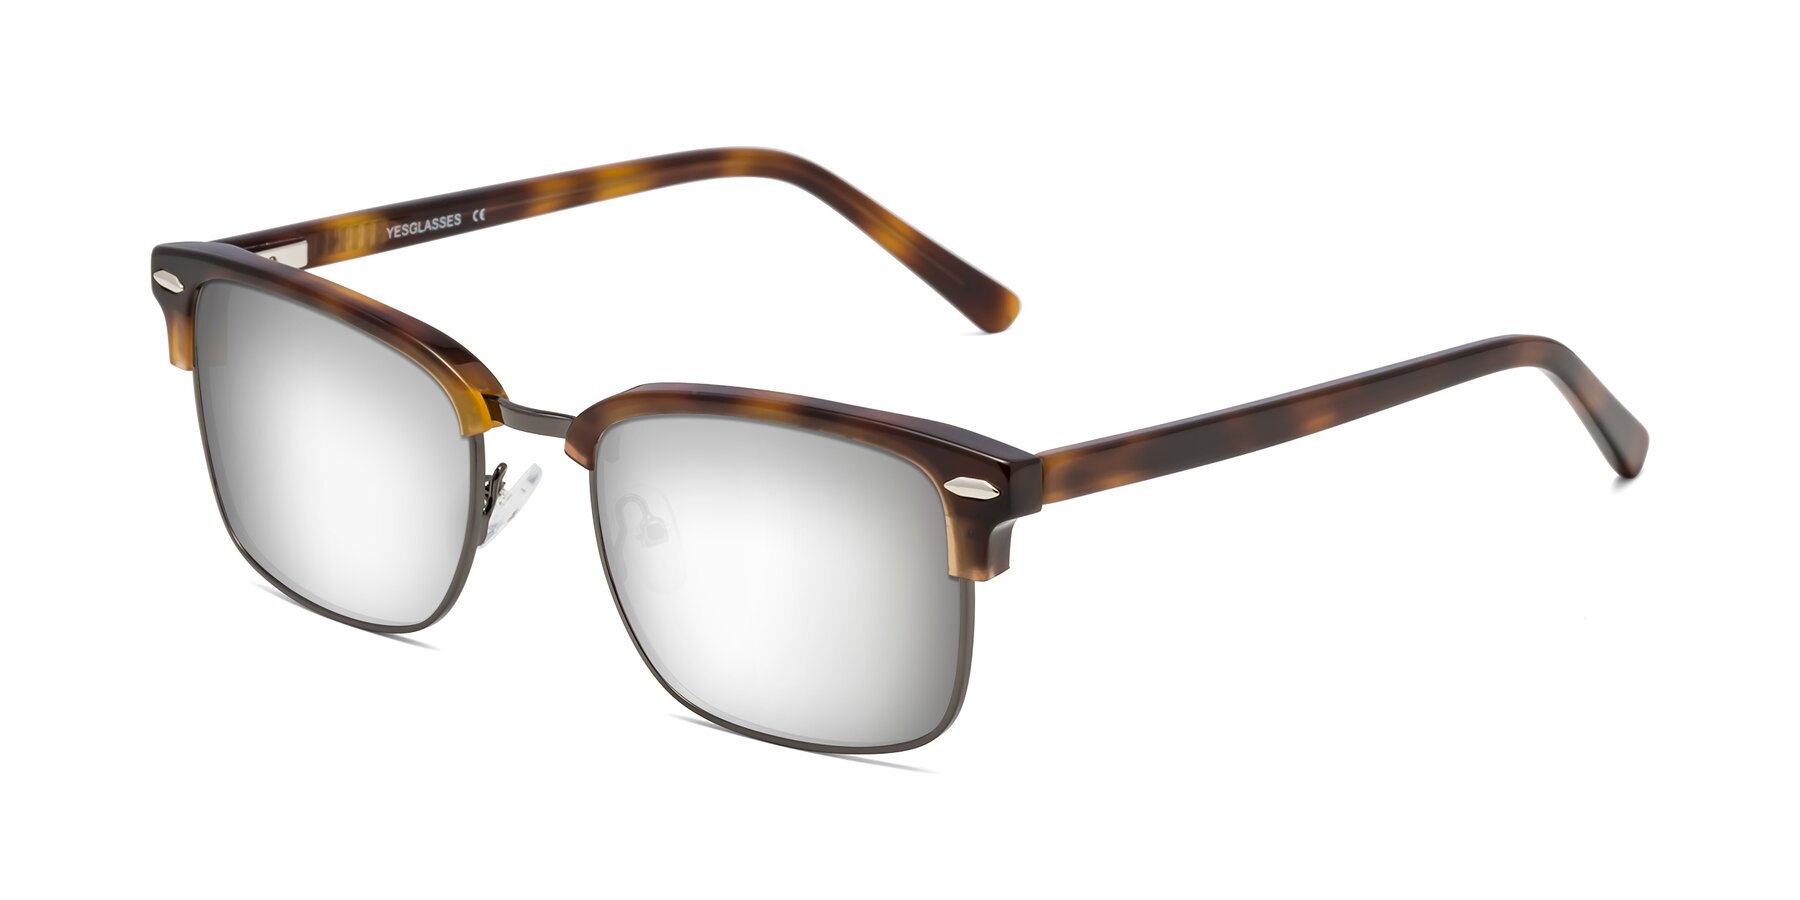 Angle of 17464 in Tortoise/ Gunmetal with Silver Mirrored Lenses